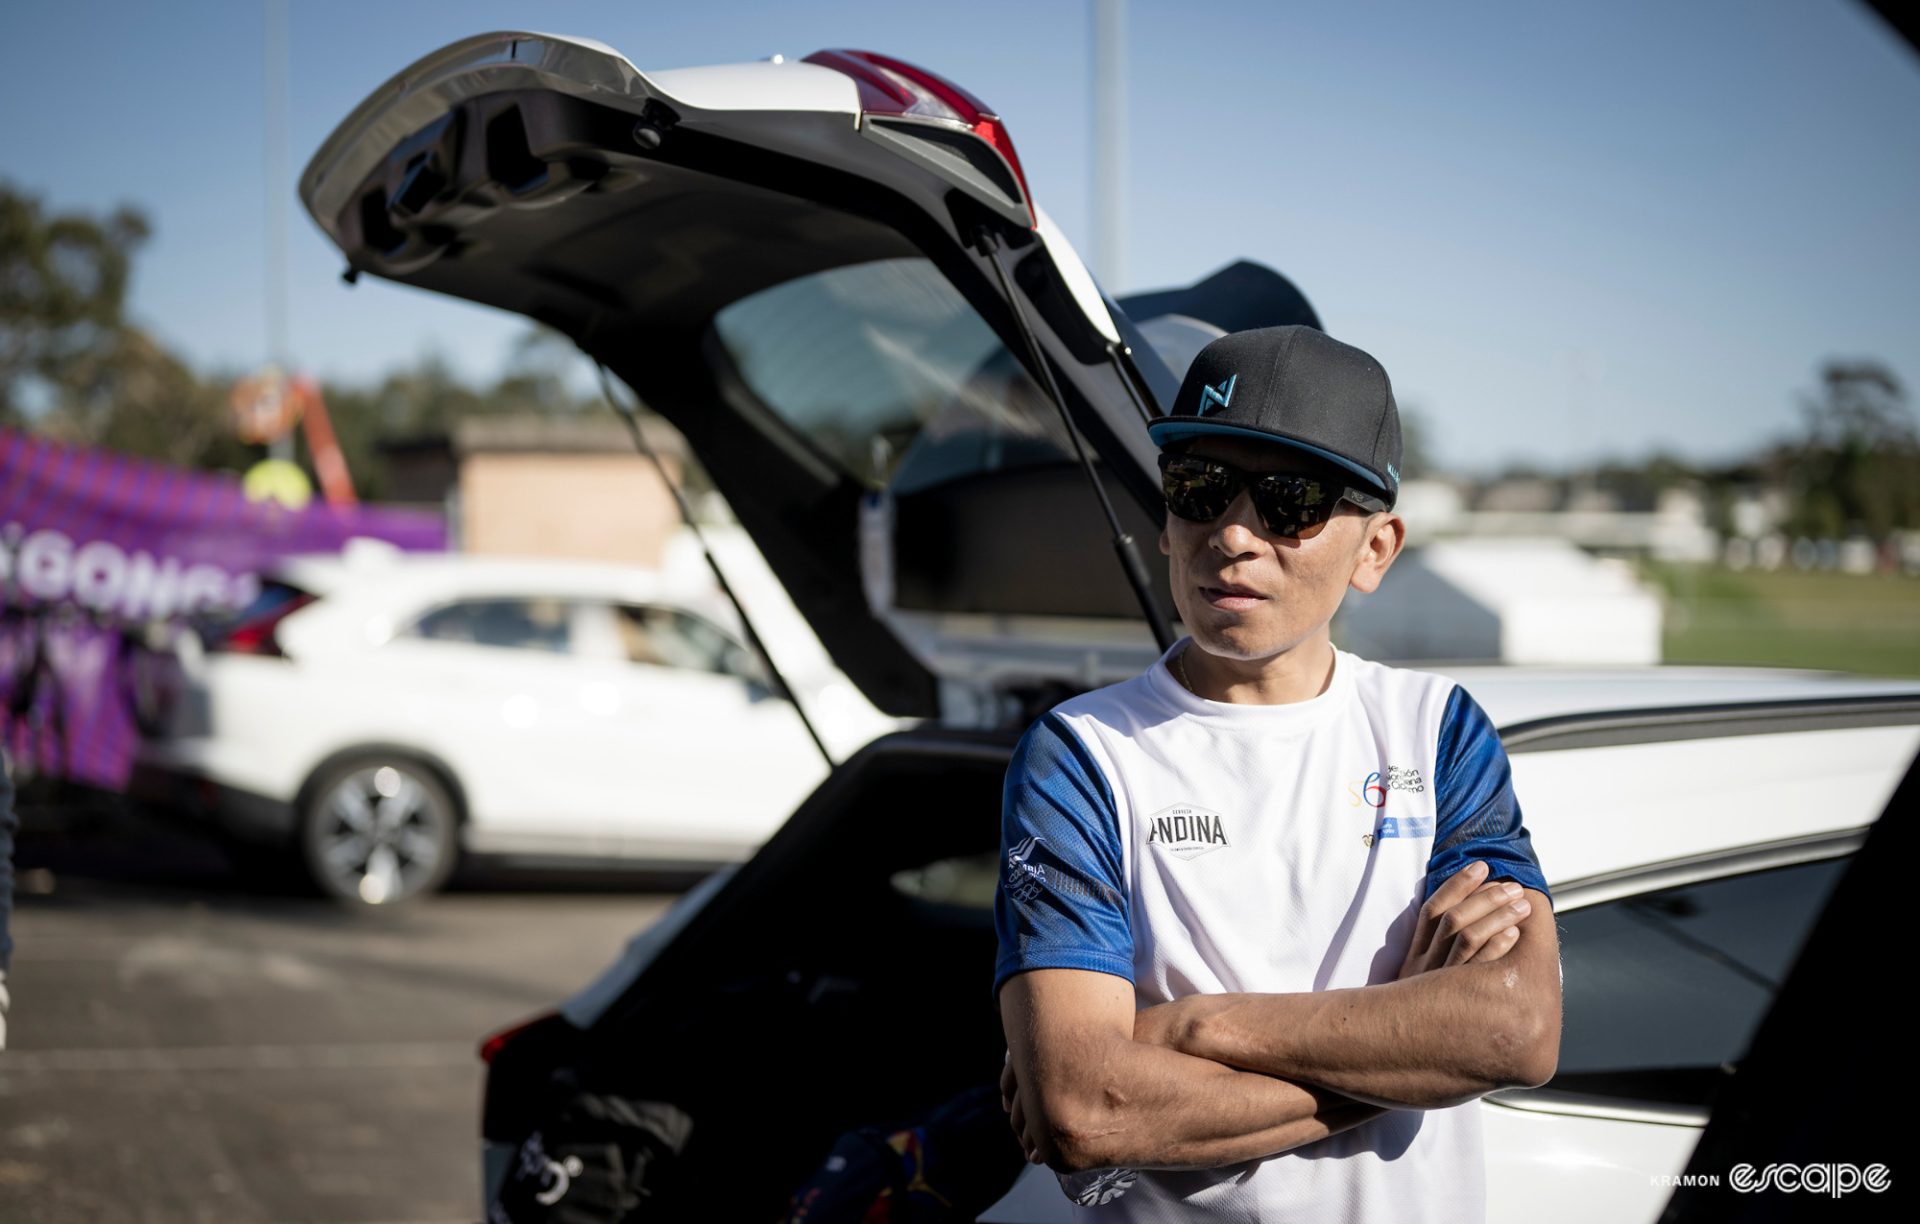 Nairo Quintana in casual clothing, leaning against a car.